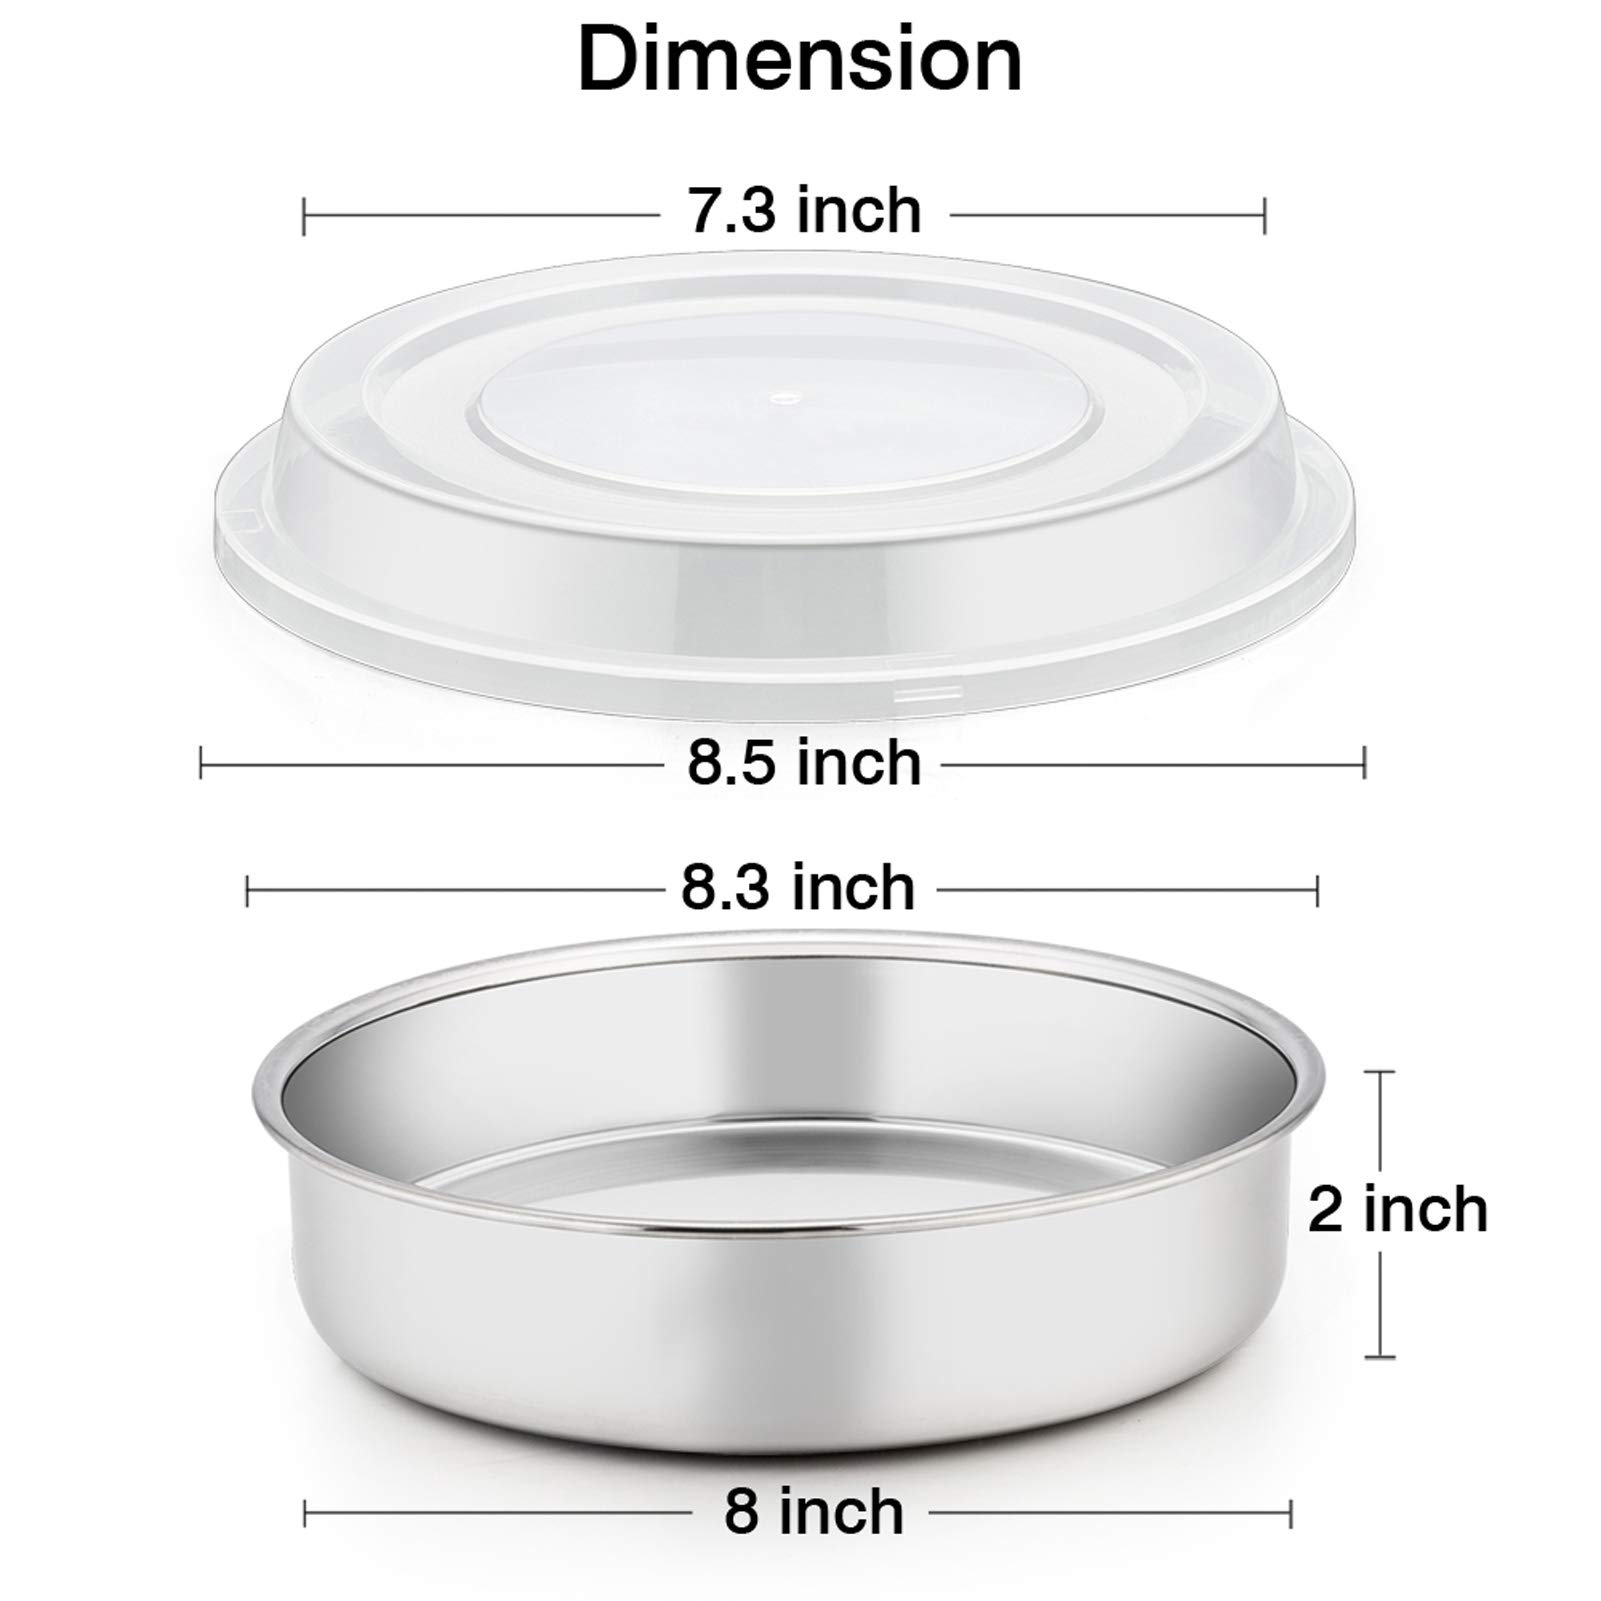 TeamFar 8 Inch Cake Pan, Stainless Steel Tiers Round Baking Cake Pans with Lids, Healthy & Heavy Duty, Dishwasher Safe & Easy Clean, Mirror Polish & Smooth Edge, Set of 4 (2 Pans + 2 Lids)